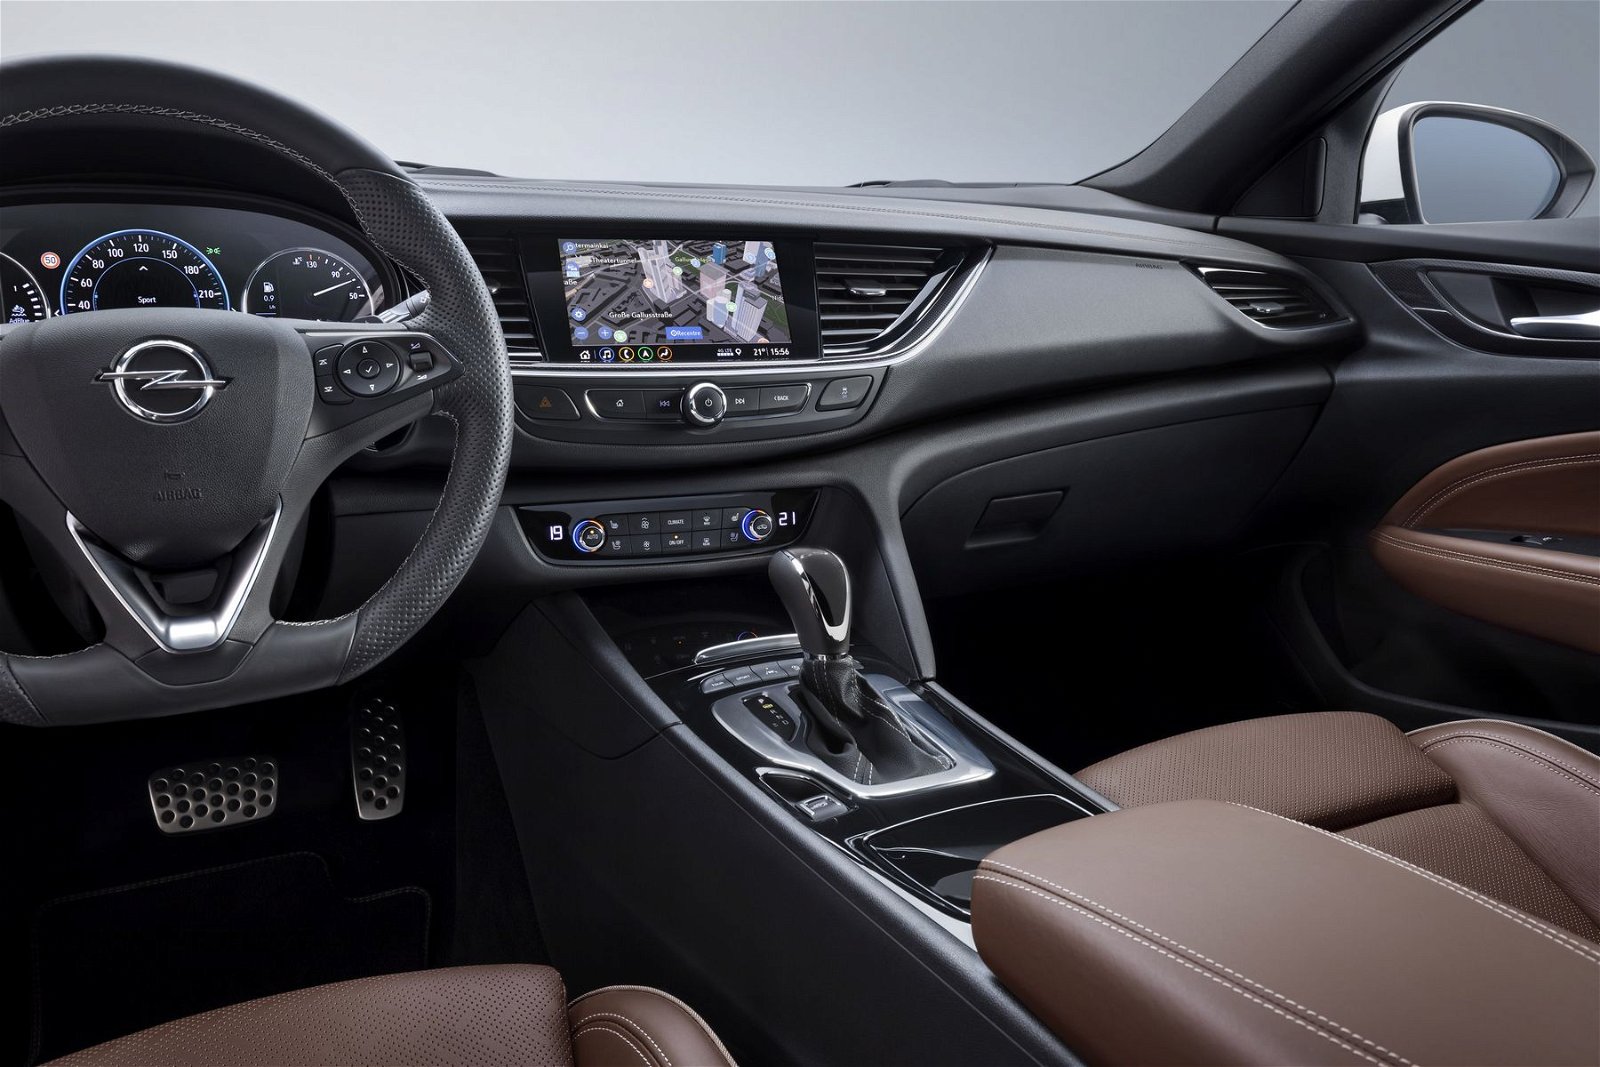 Updated infotainment system for Opel Insignia brings Live Traffic,  real-time fuel prices, map updates